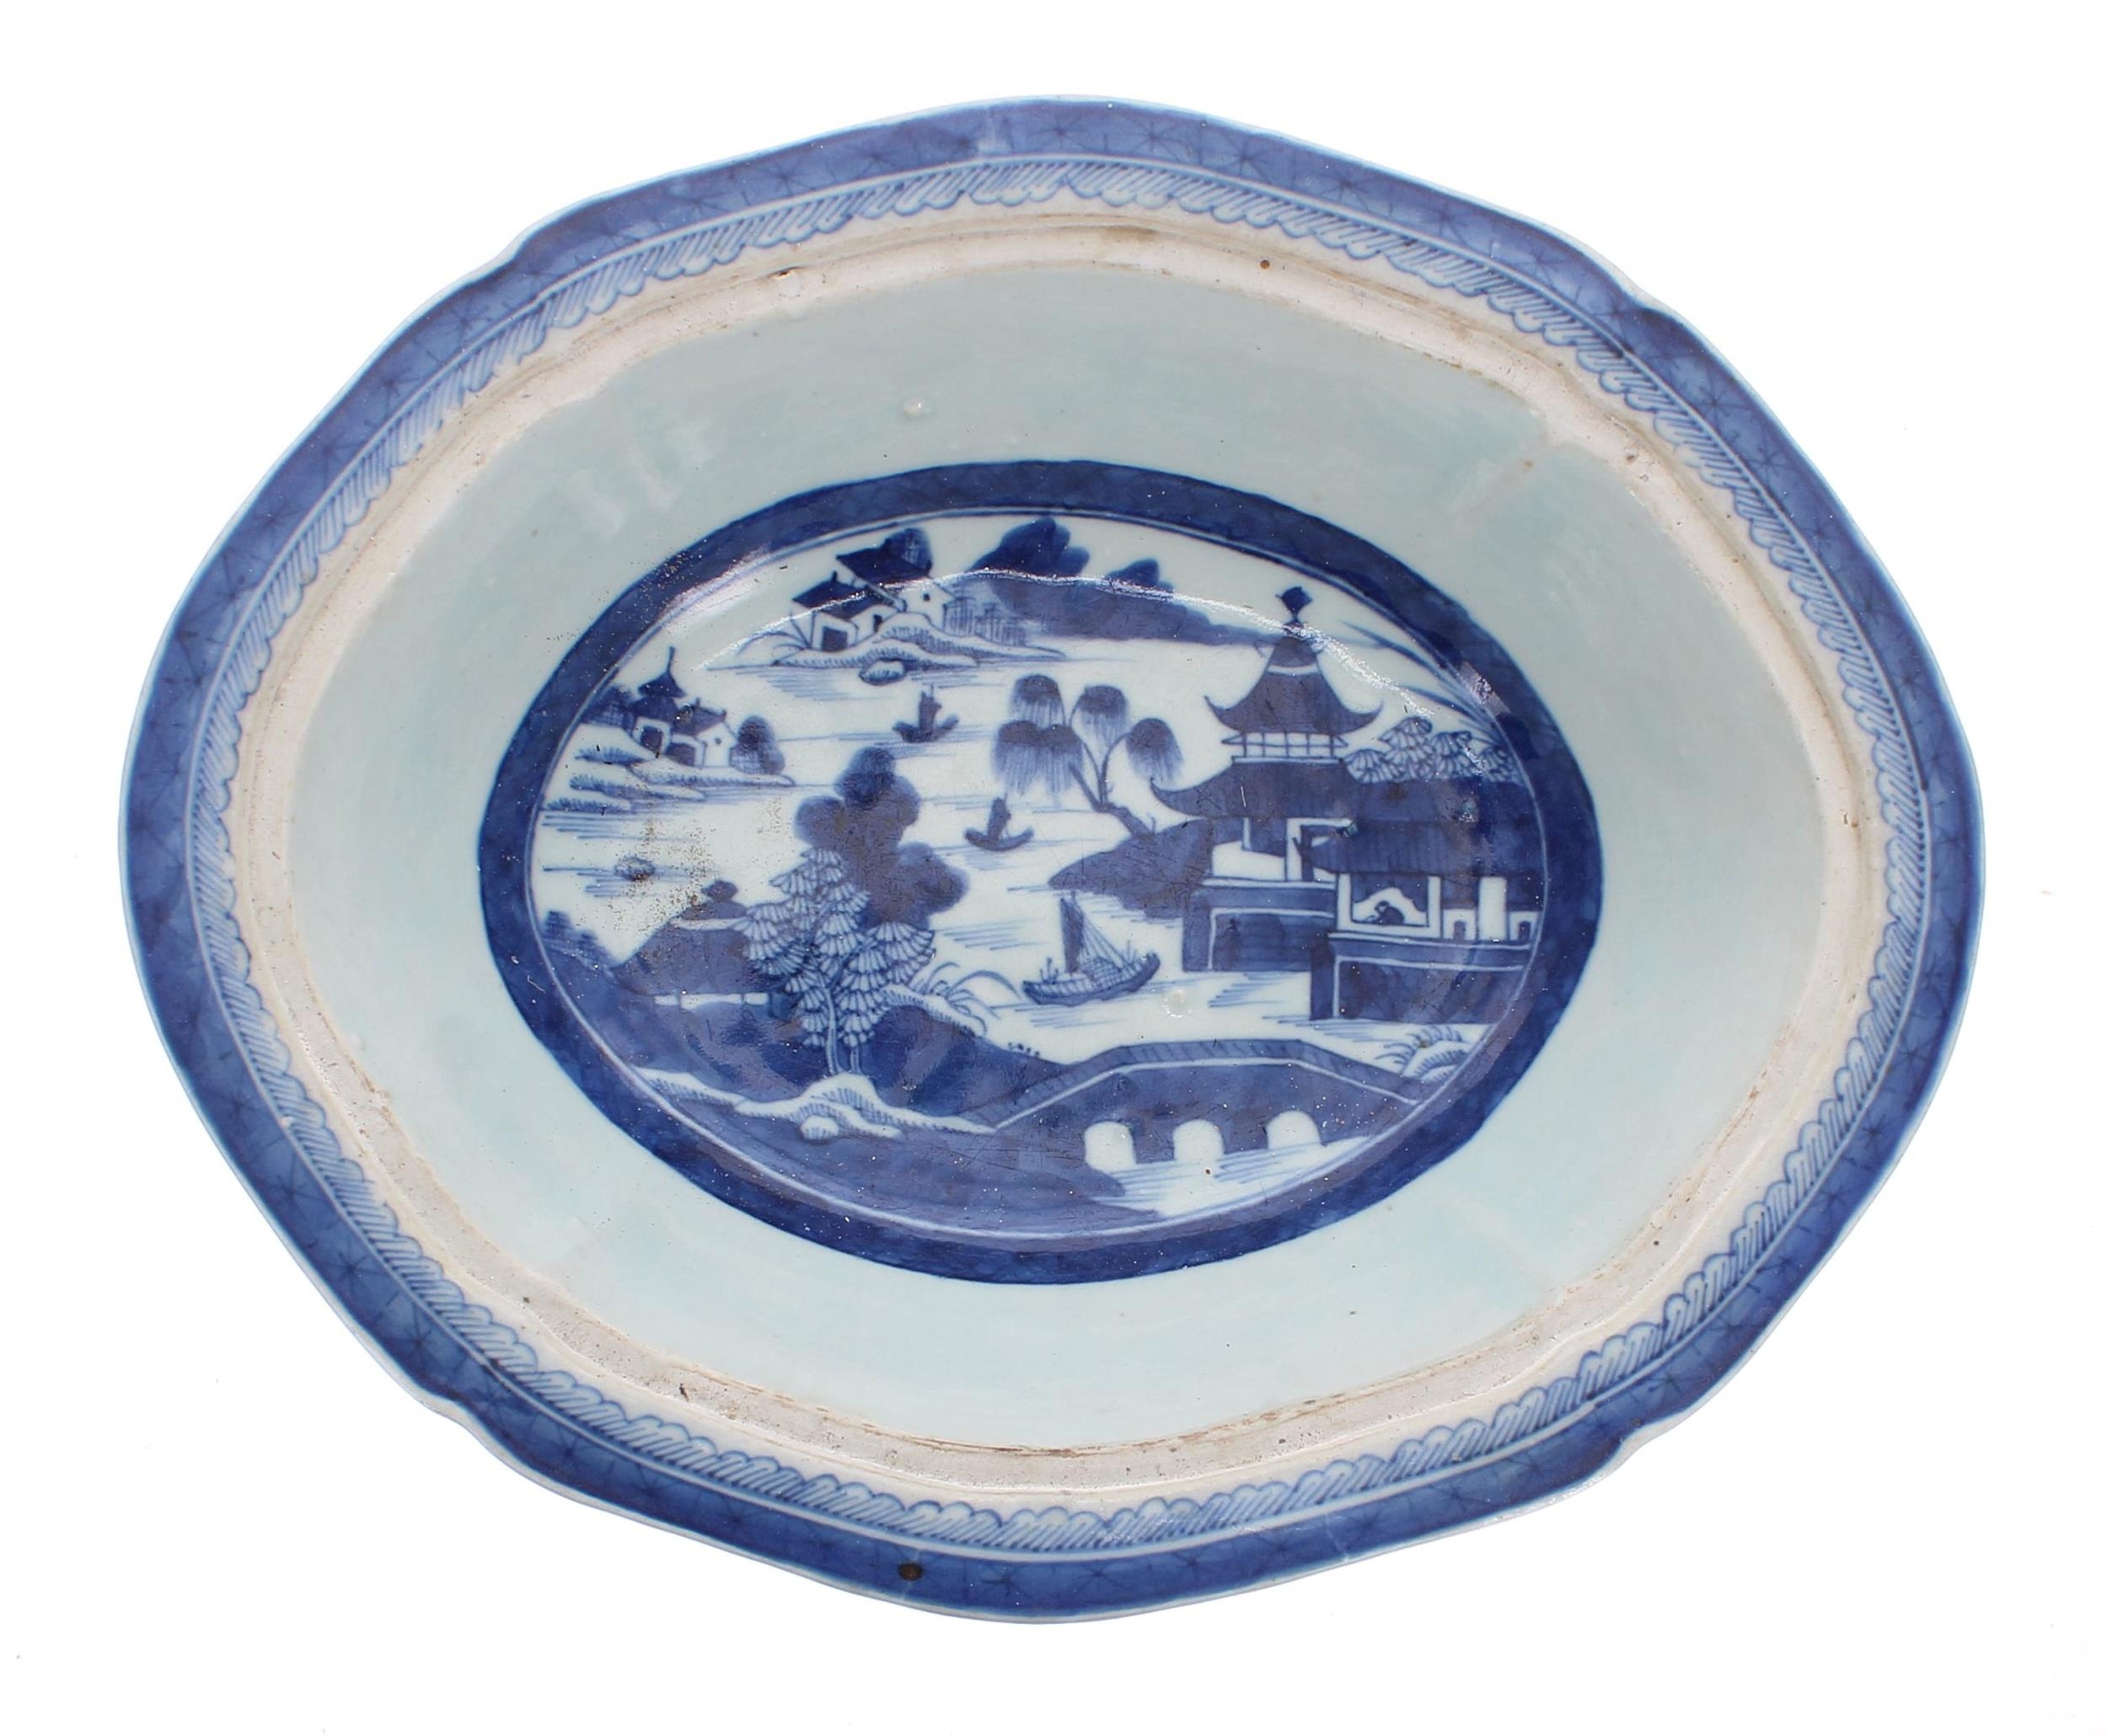 Chinese export blue and white porcelain oval tureen and cover, decorated with pagoda landscapes, 11" - Image 6 of 7